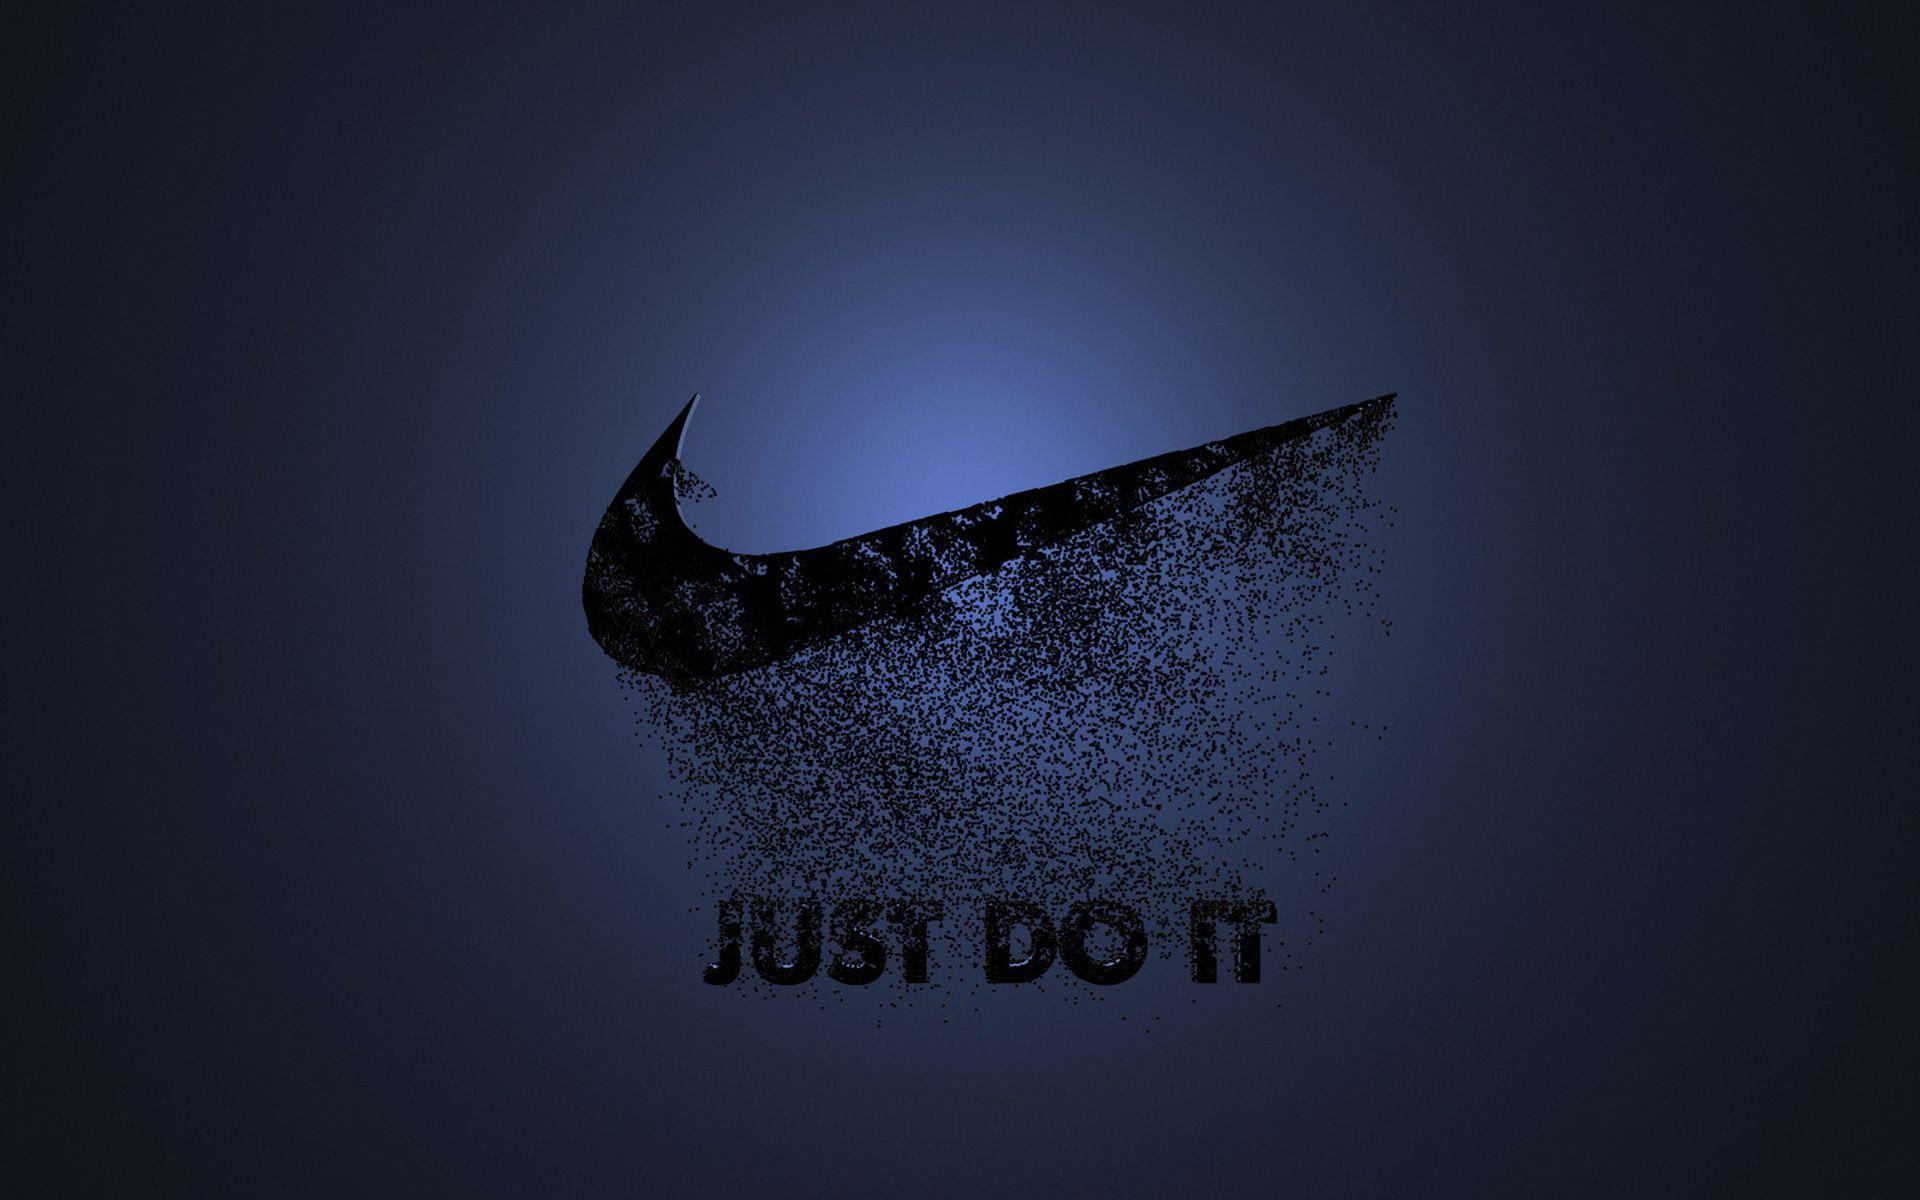 Blue Nike Sign Wallpaper Image & Picture